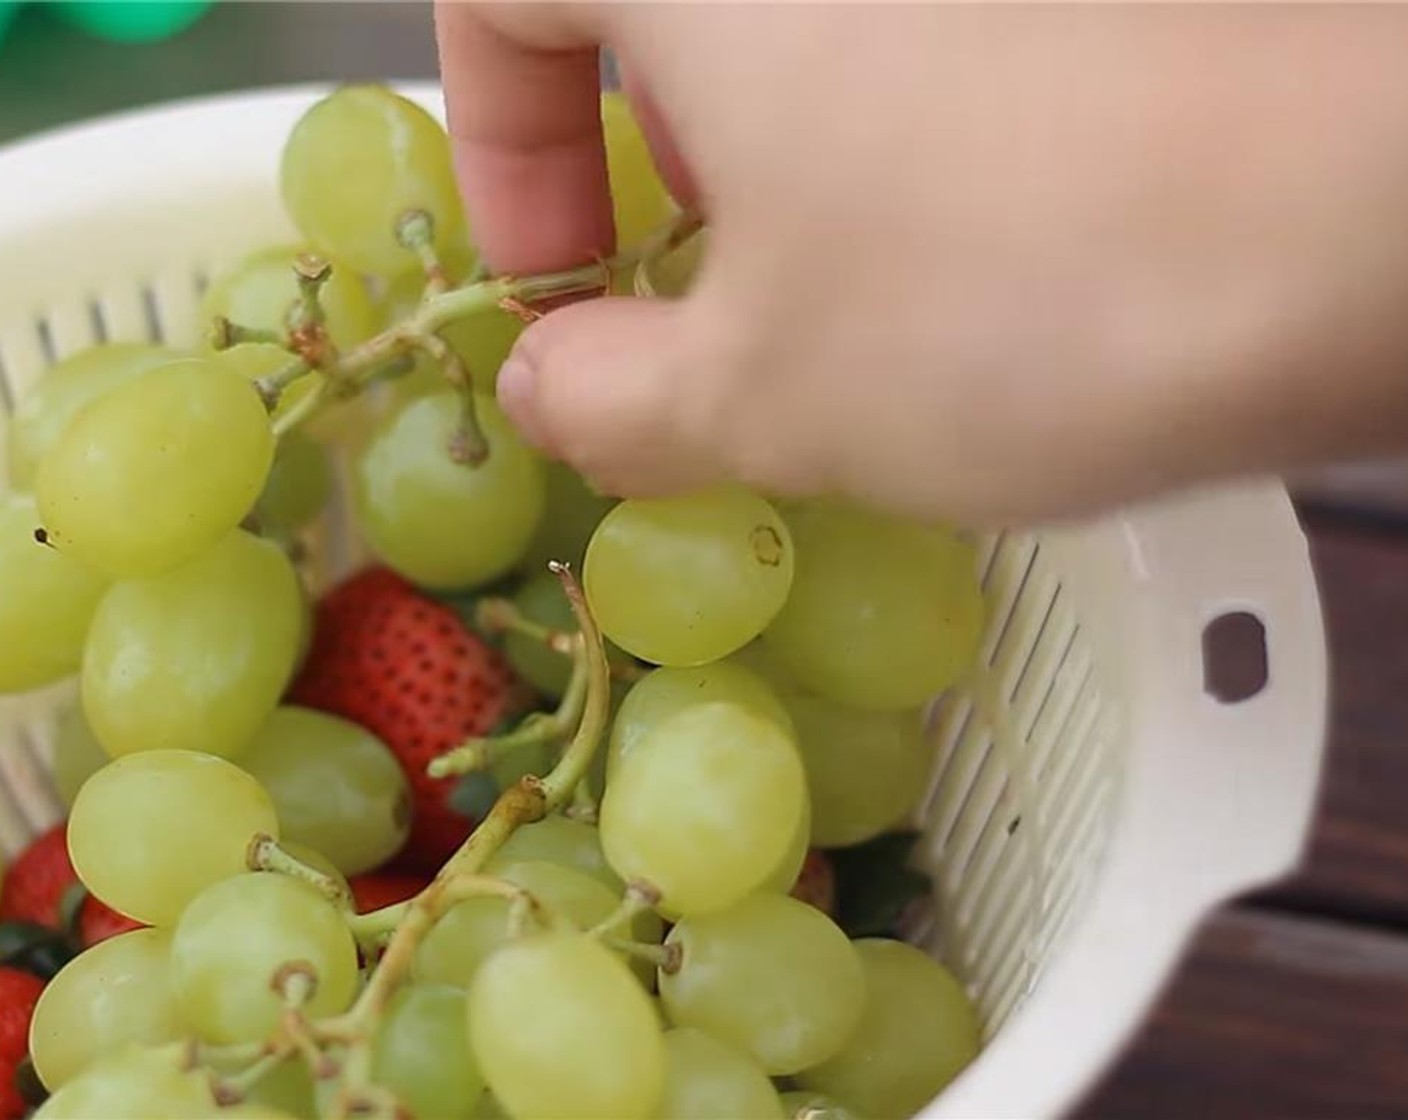 step 1 Wash the Grapes (1 handful), Fresh Blueberry (1 handful), Fresh Strawberry (1 handful), and set them aside.